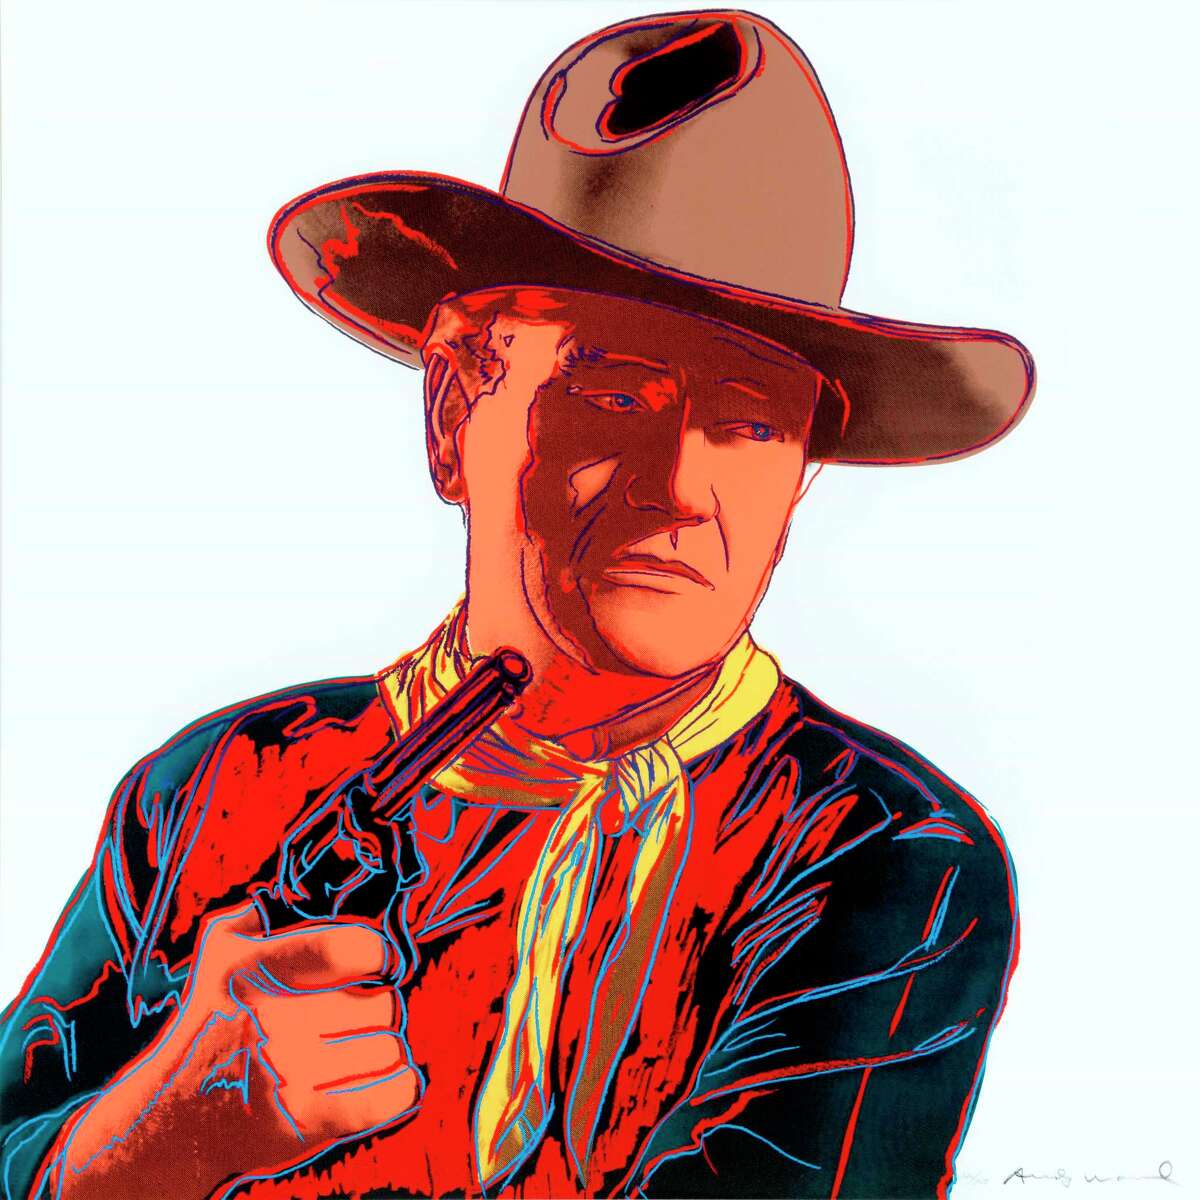 Andy Warhol's screenprint "John Wayne," from his "Cowboys and Indians" series, is on display at the Briscoe Western Art Museum. All 10 pieces from the original suite will be displayed along with related works by Warhol. A companion exhibit, "Billy Schenck: Myth of the West" features Western-themed pop pieces by an artist who has cited Warhol as an inspiration. Schenck will sign copies of "Schenck in the 21st Century" by Amy Abrams in the Museum Store from 11 a.m. to 1 p.m. Saturday. The exhibit is included with regular museum admission. Opens Friday. Through Sept. 3, Briscoe Western Art Museum, 210 W. Market St. $8 to $10. Info, 210-299-4499; briscoemuseum.org. -- Deborah Martin